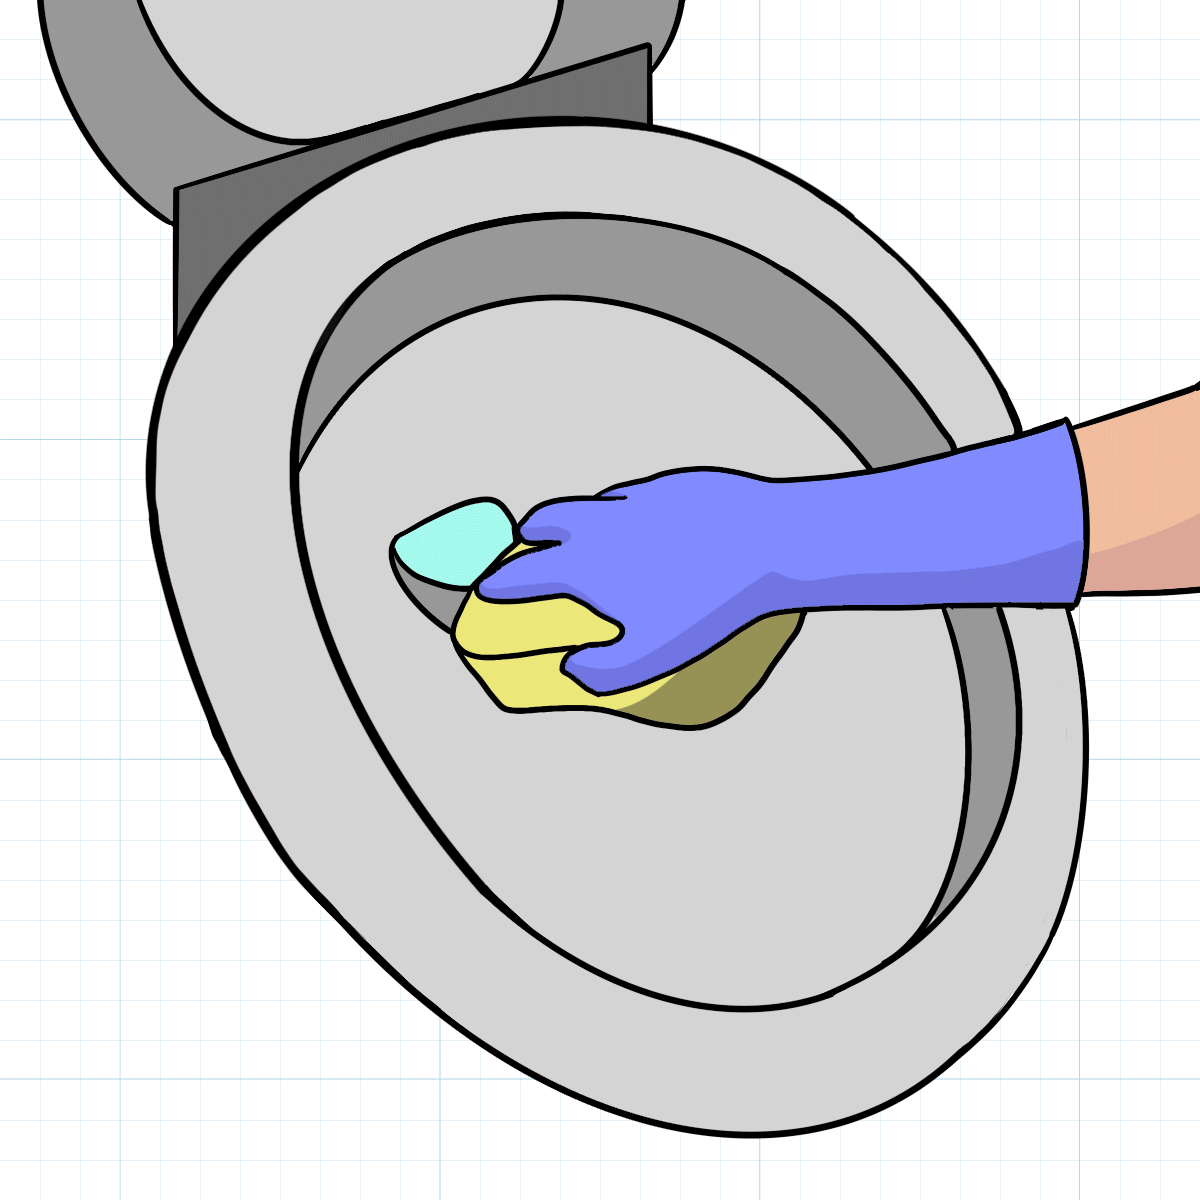 How To Unclog A Toilet Without A Plunger with the Use of A Plastic Bottle To Create Water Pressure